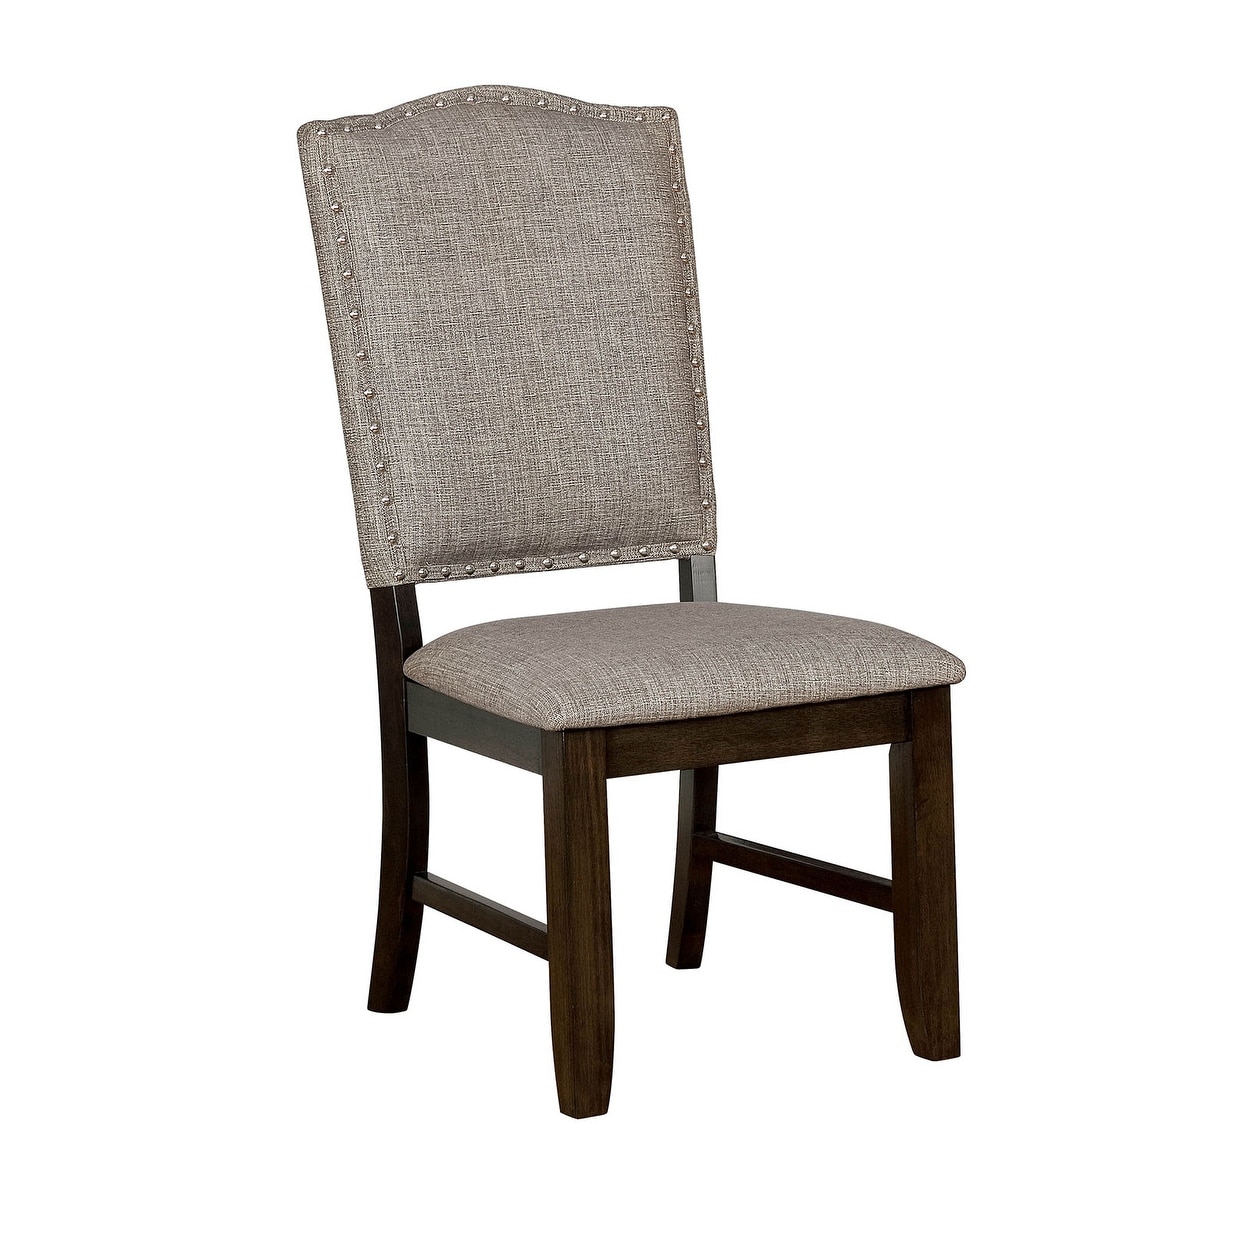 Fabric Upholstered Wooden Side Chair with Camelback, Pack of Two, Gray and Walnut Brown - 39.625 H x 24 W x 18.875 L Inches